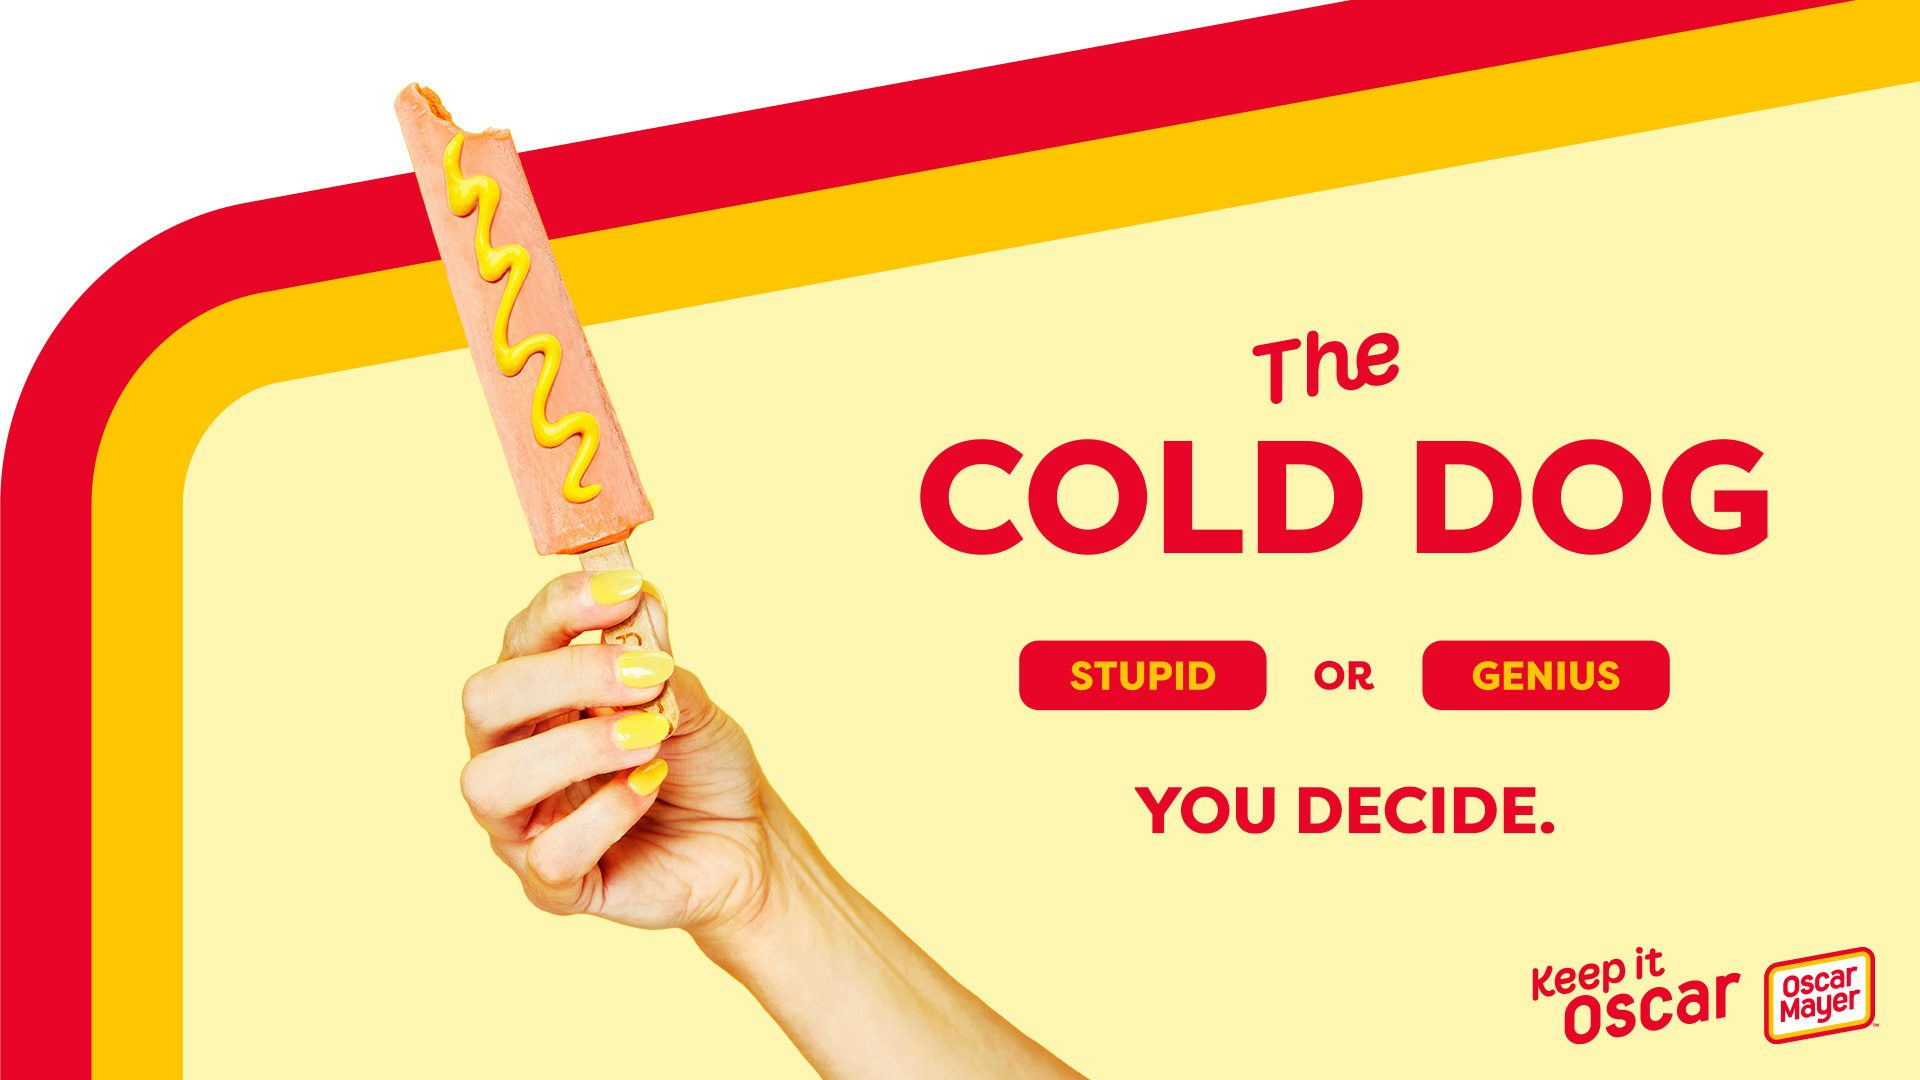 Image shows a person holding Oscar Mayer's Cold Dog, a hot-dog flavoured popsicle, and reads 'Stupid or Genius, you decide'